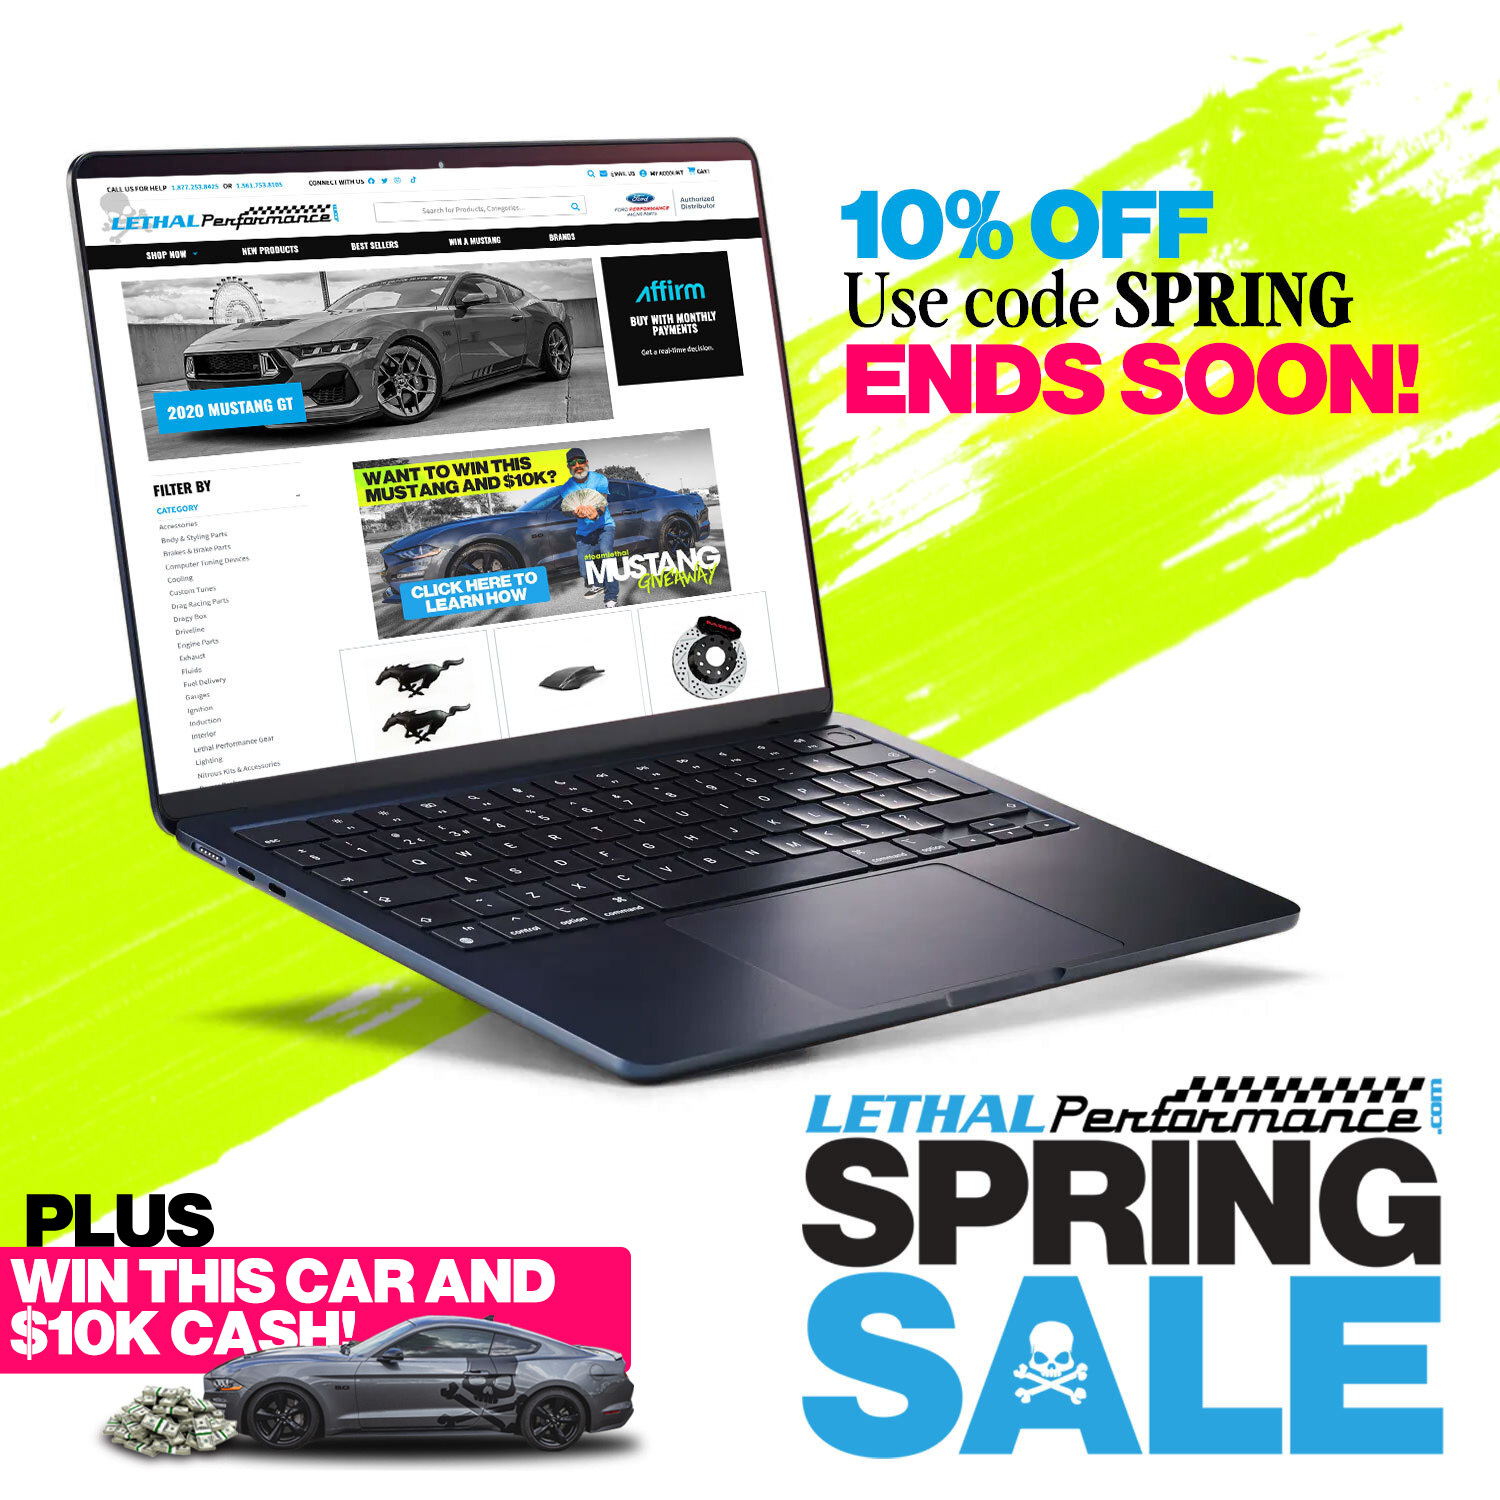 S650 Mustang Spring SALE has SPRUNG here at Lethal Performance!! sitewide 10% ends soon + car